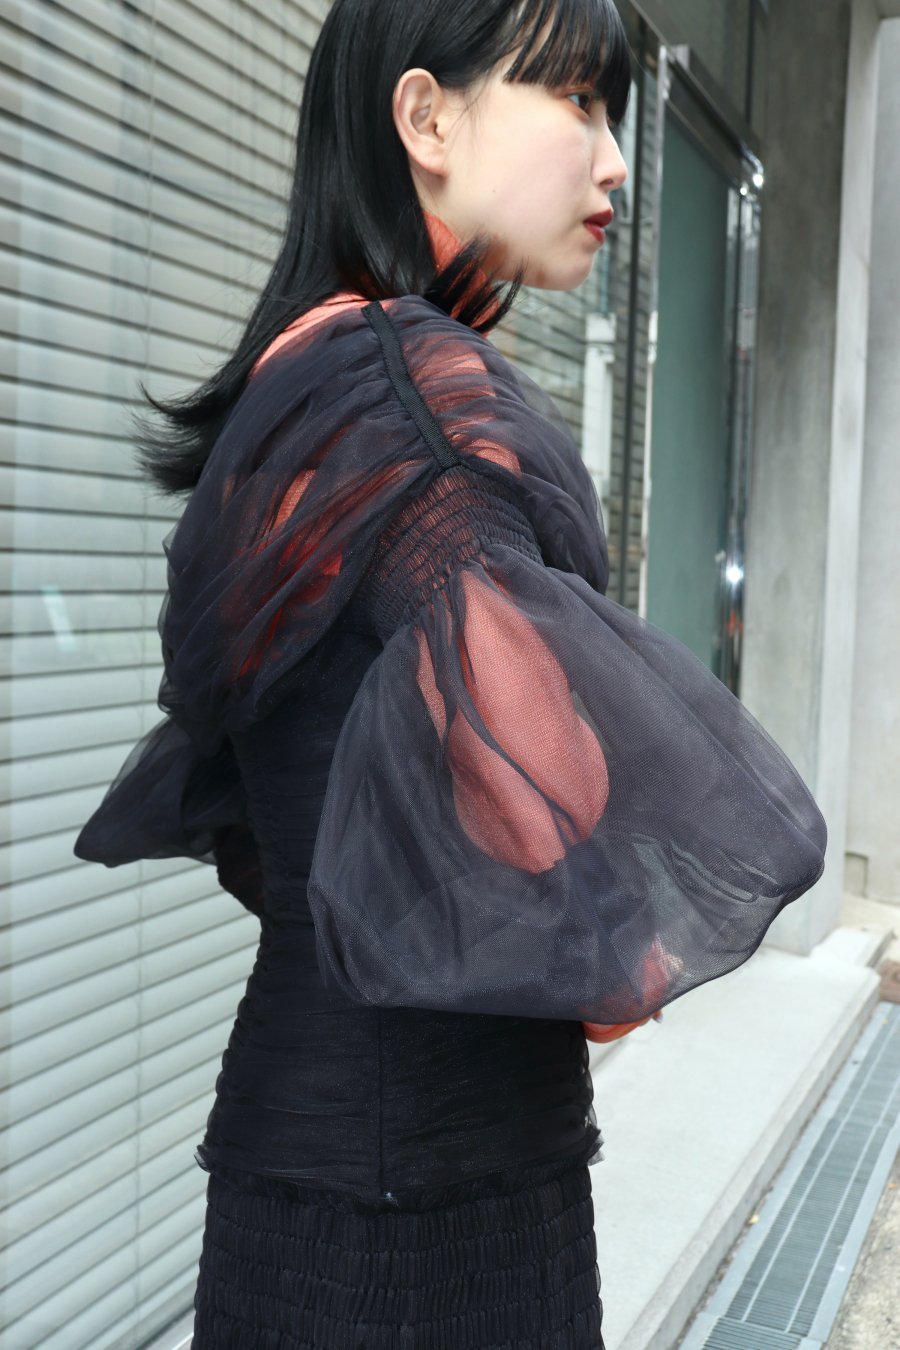 FETICO（フェティコ）のMUTTON SLEEVE TULLE BLOUSE BLACKの通販サイト ...